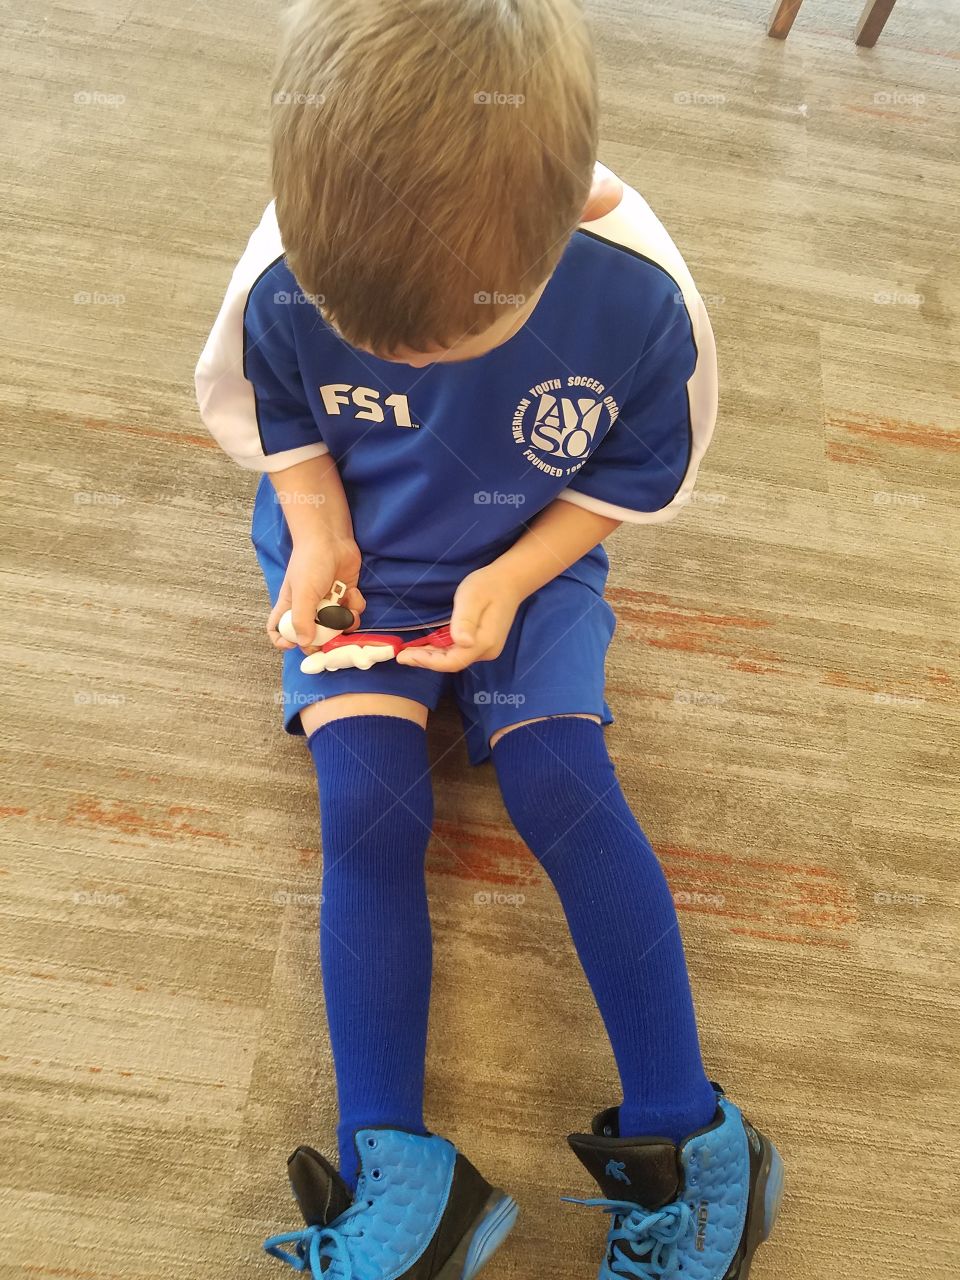 Blonde boy, in blue soccer uniform, sits on the floor and plays with snoopy toy.